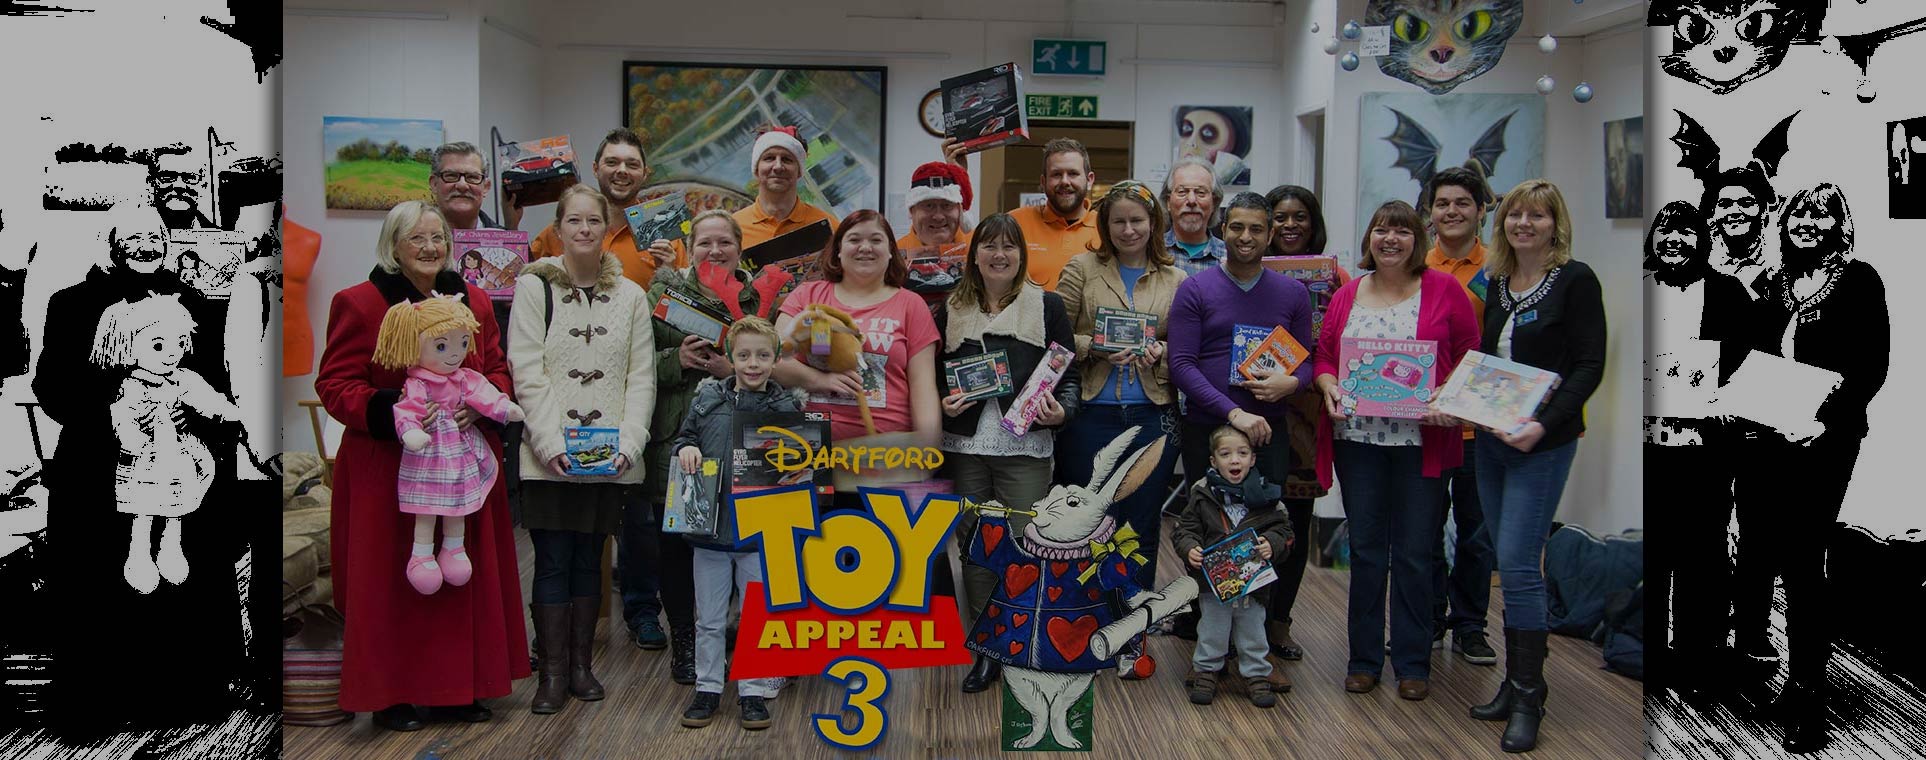 Dartford Toy Appeal 3 has been a wonderful success